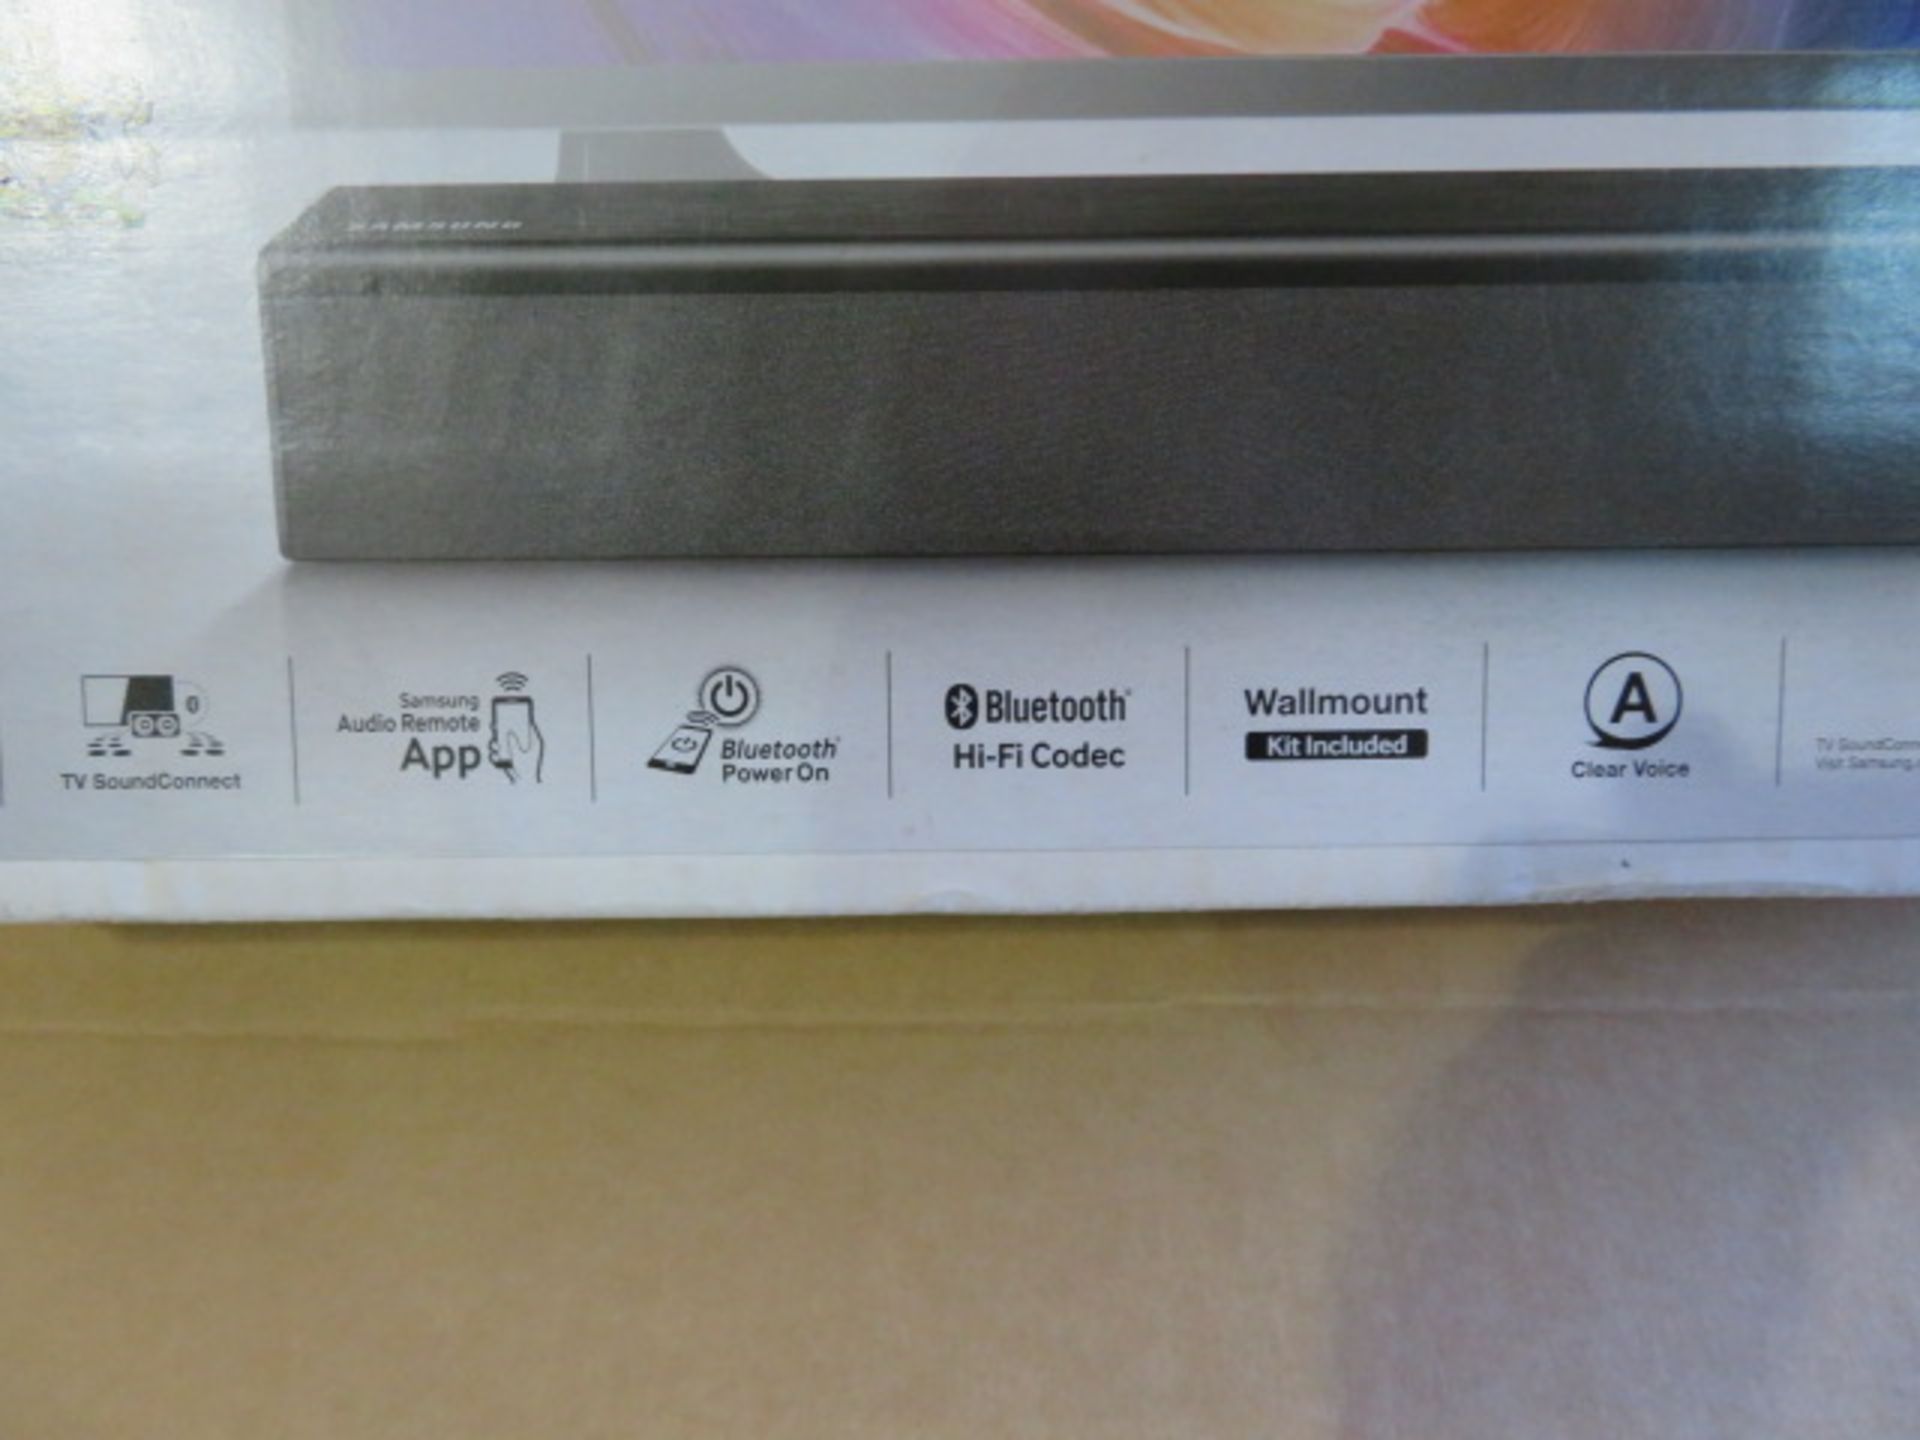 (18) 1 x Grade B - Samsung HW-J250 80 W 2.2 Channel Soundbar with Bluetooth and Built-In Subwoo... - Image 3 of 4